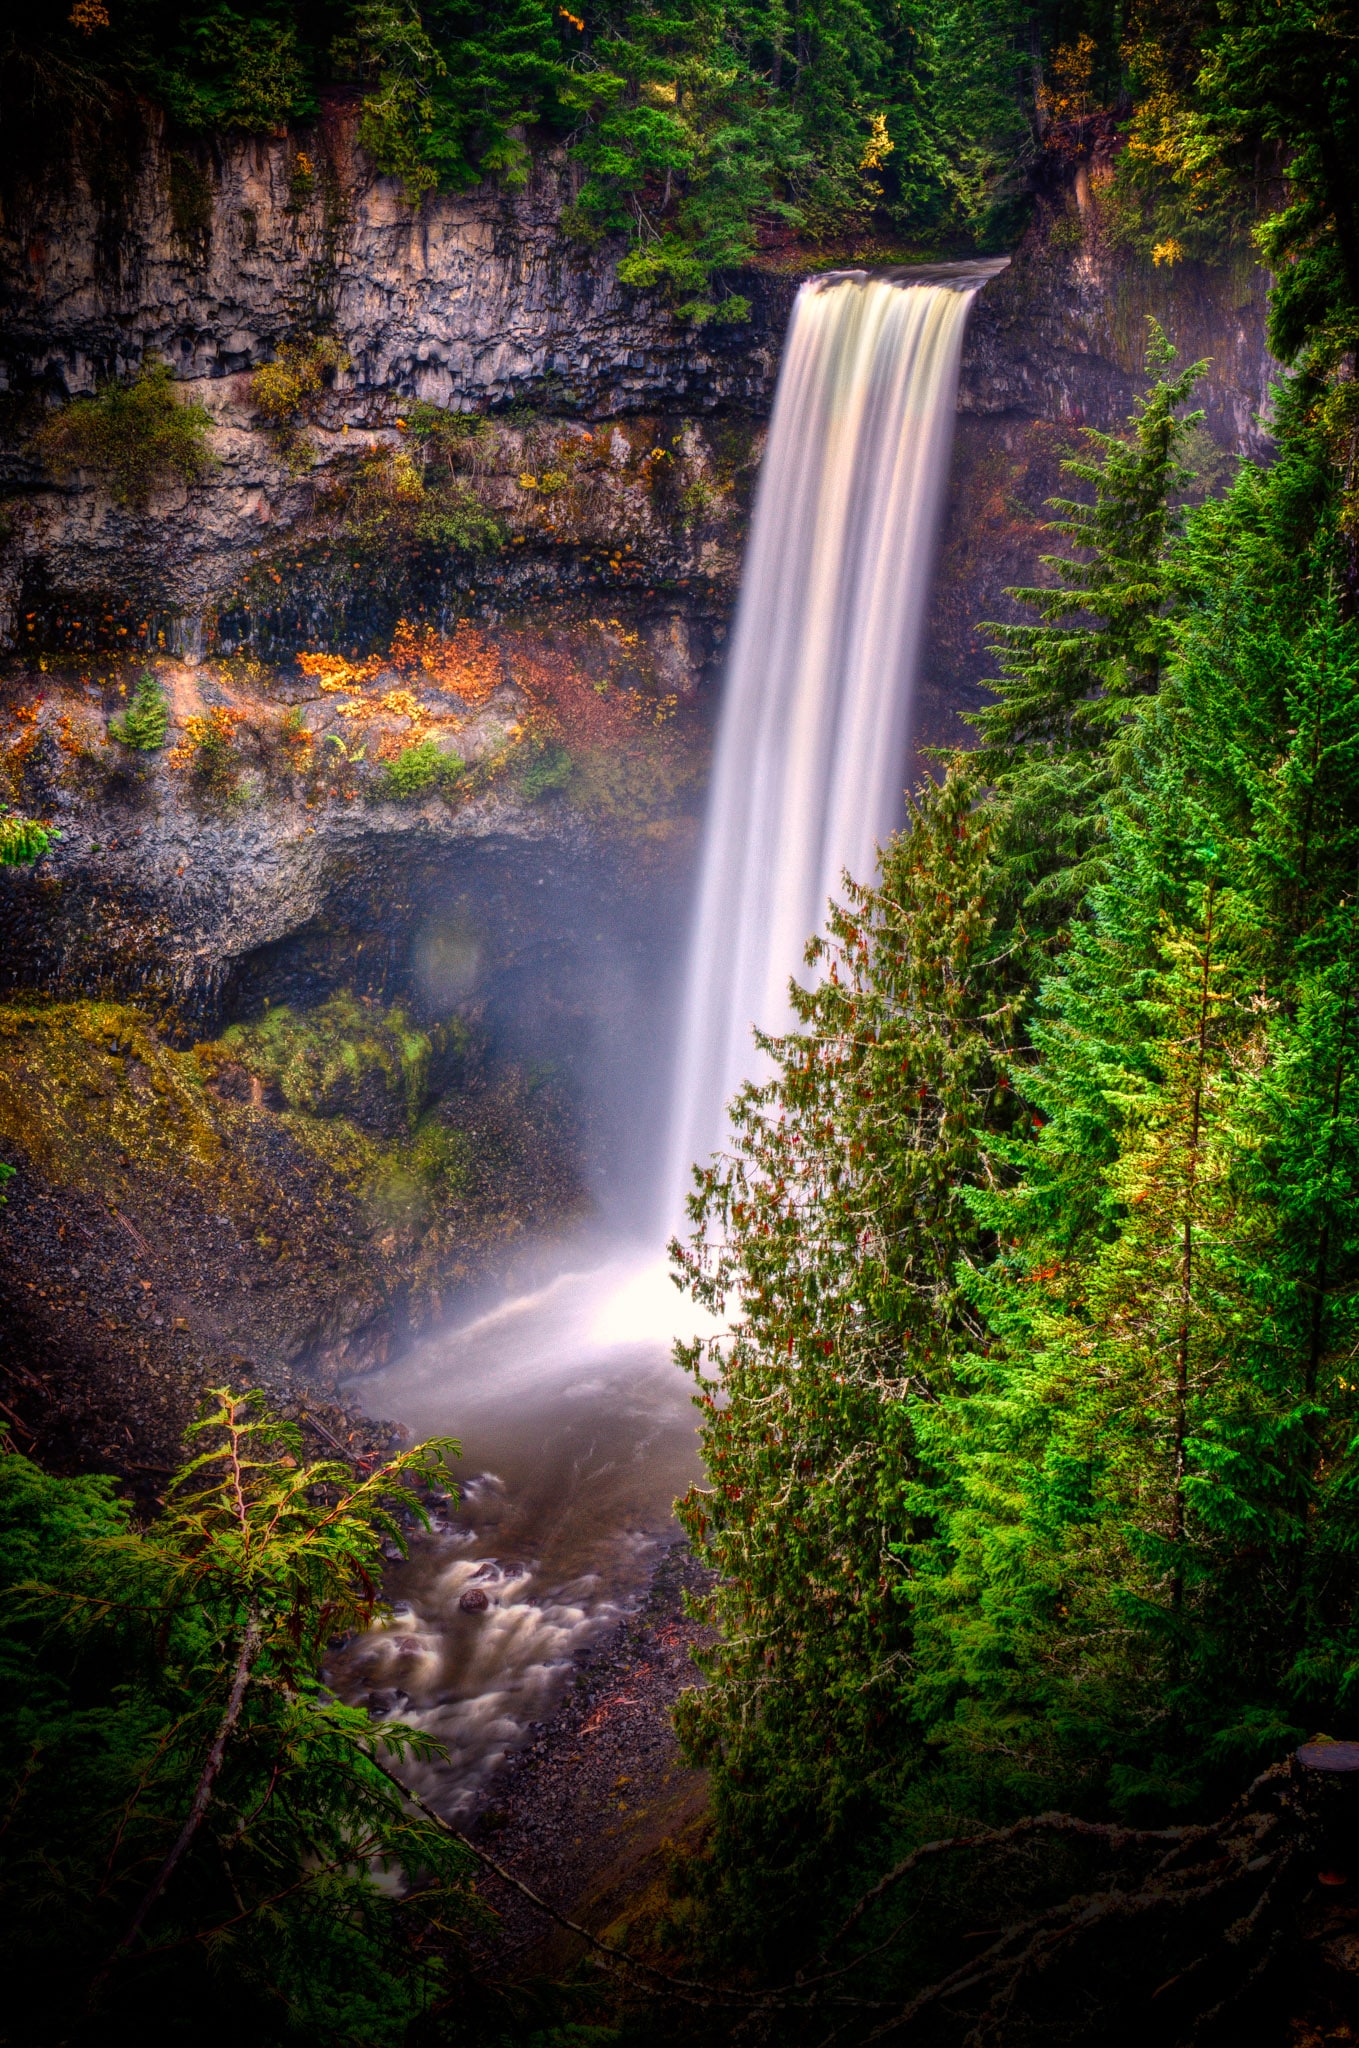 A misty and mysterious view of Brandywine Falls in Brandywine Falls Provincial Park off the Sea-to-Sky Highway along the coast of British Columbia, Canada.